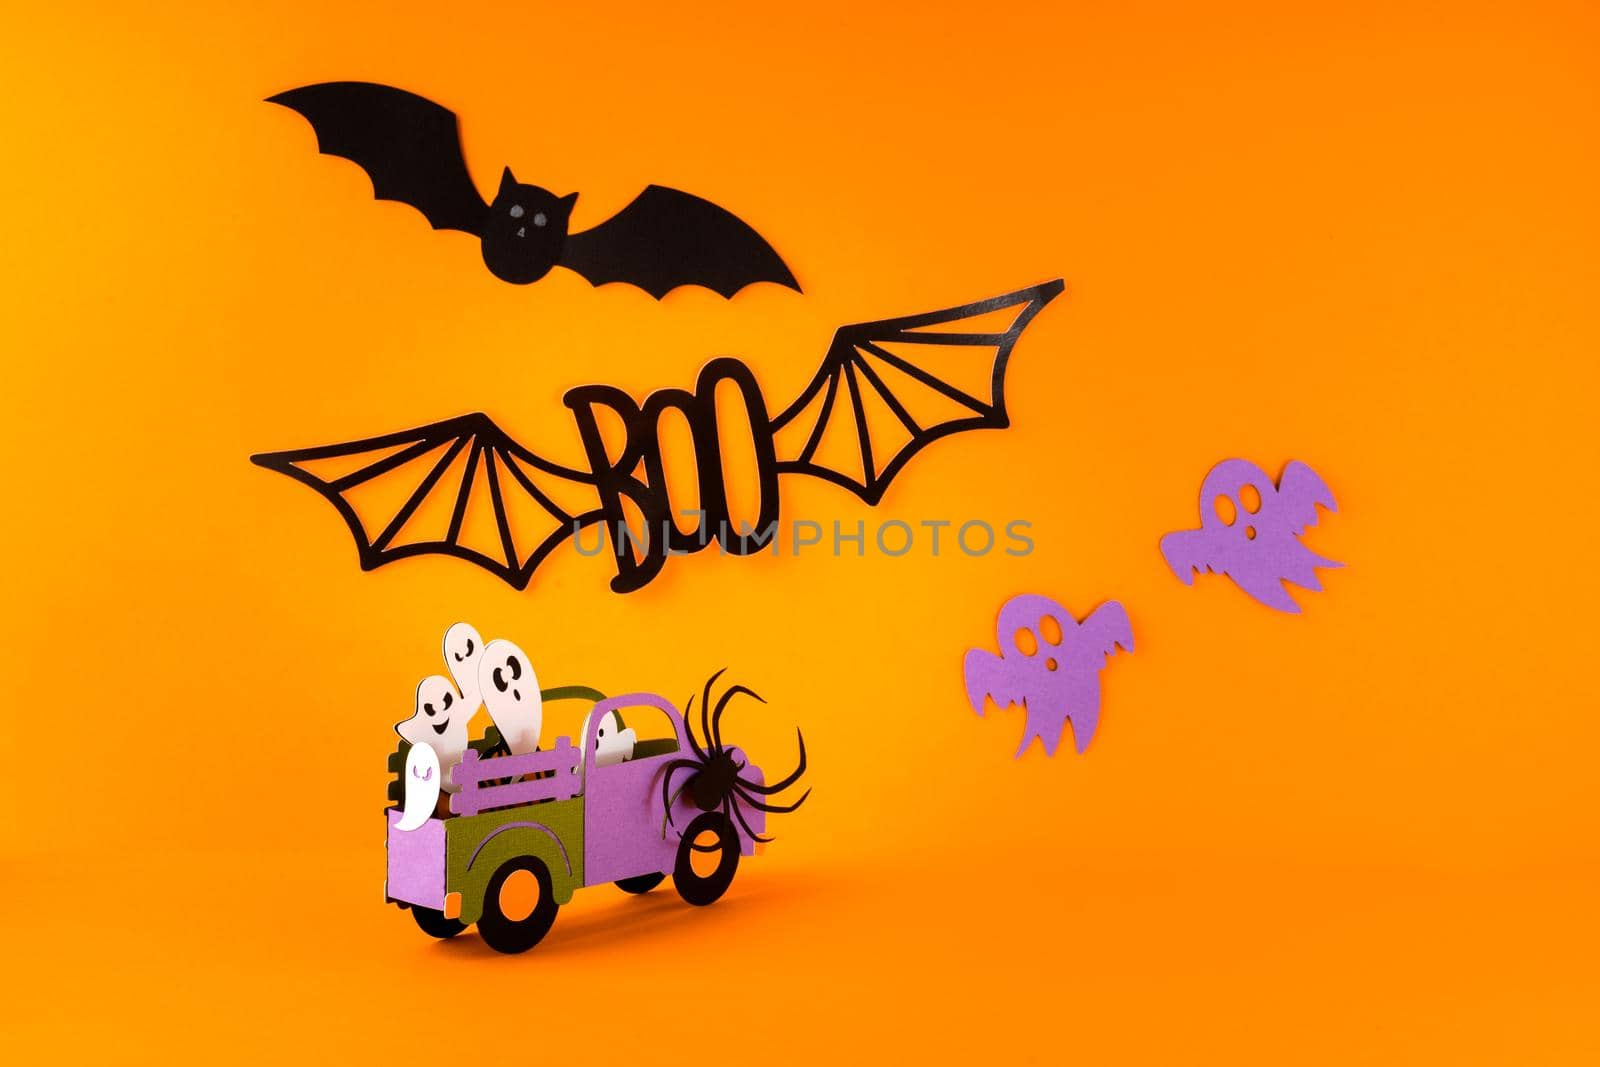 Happy halloween holiday concept. Halloween handmade paper decorations, spiders, ghosts in car, bats, boo text on orange background. Halloween festival party, greeting card mockup with copy space.